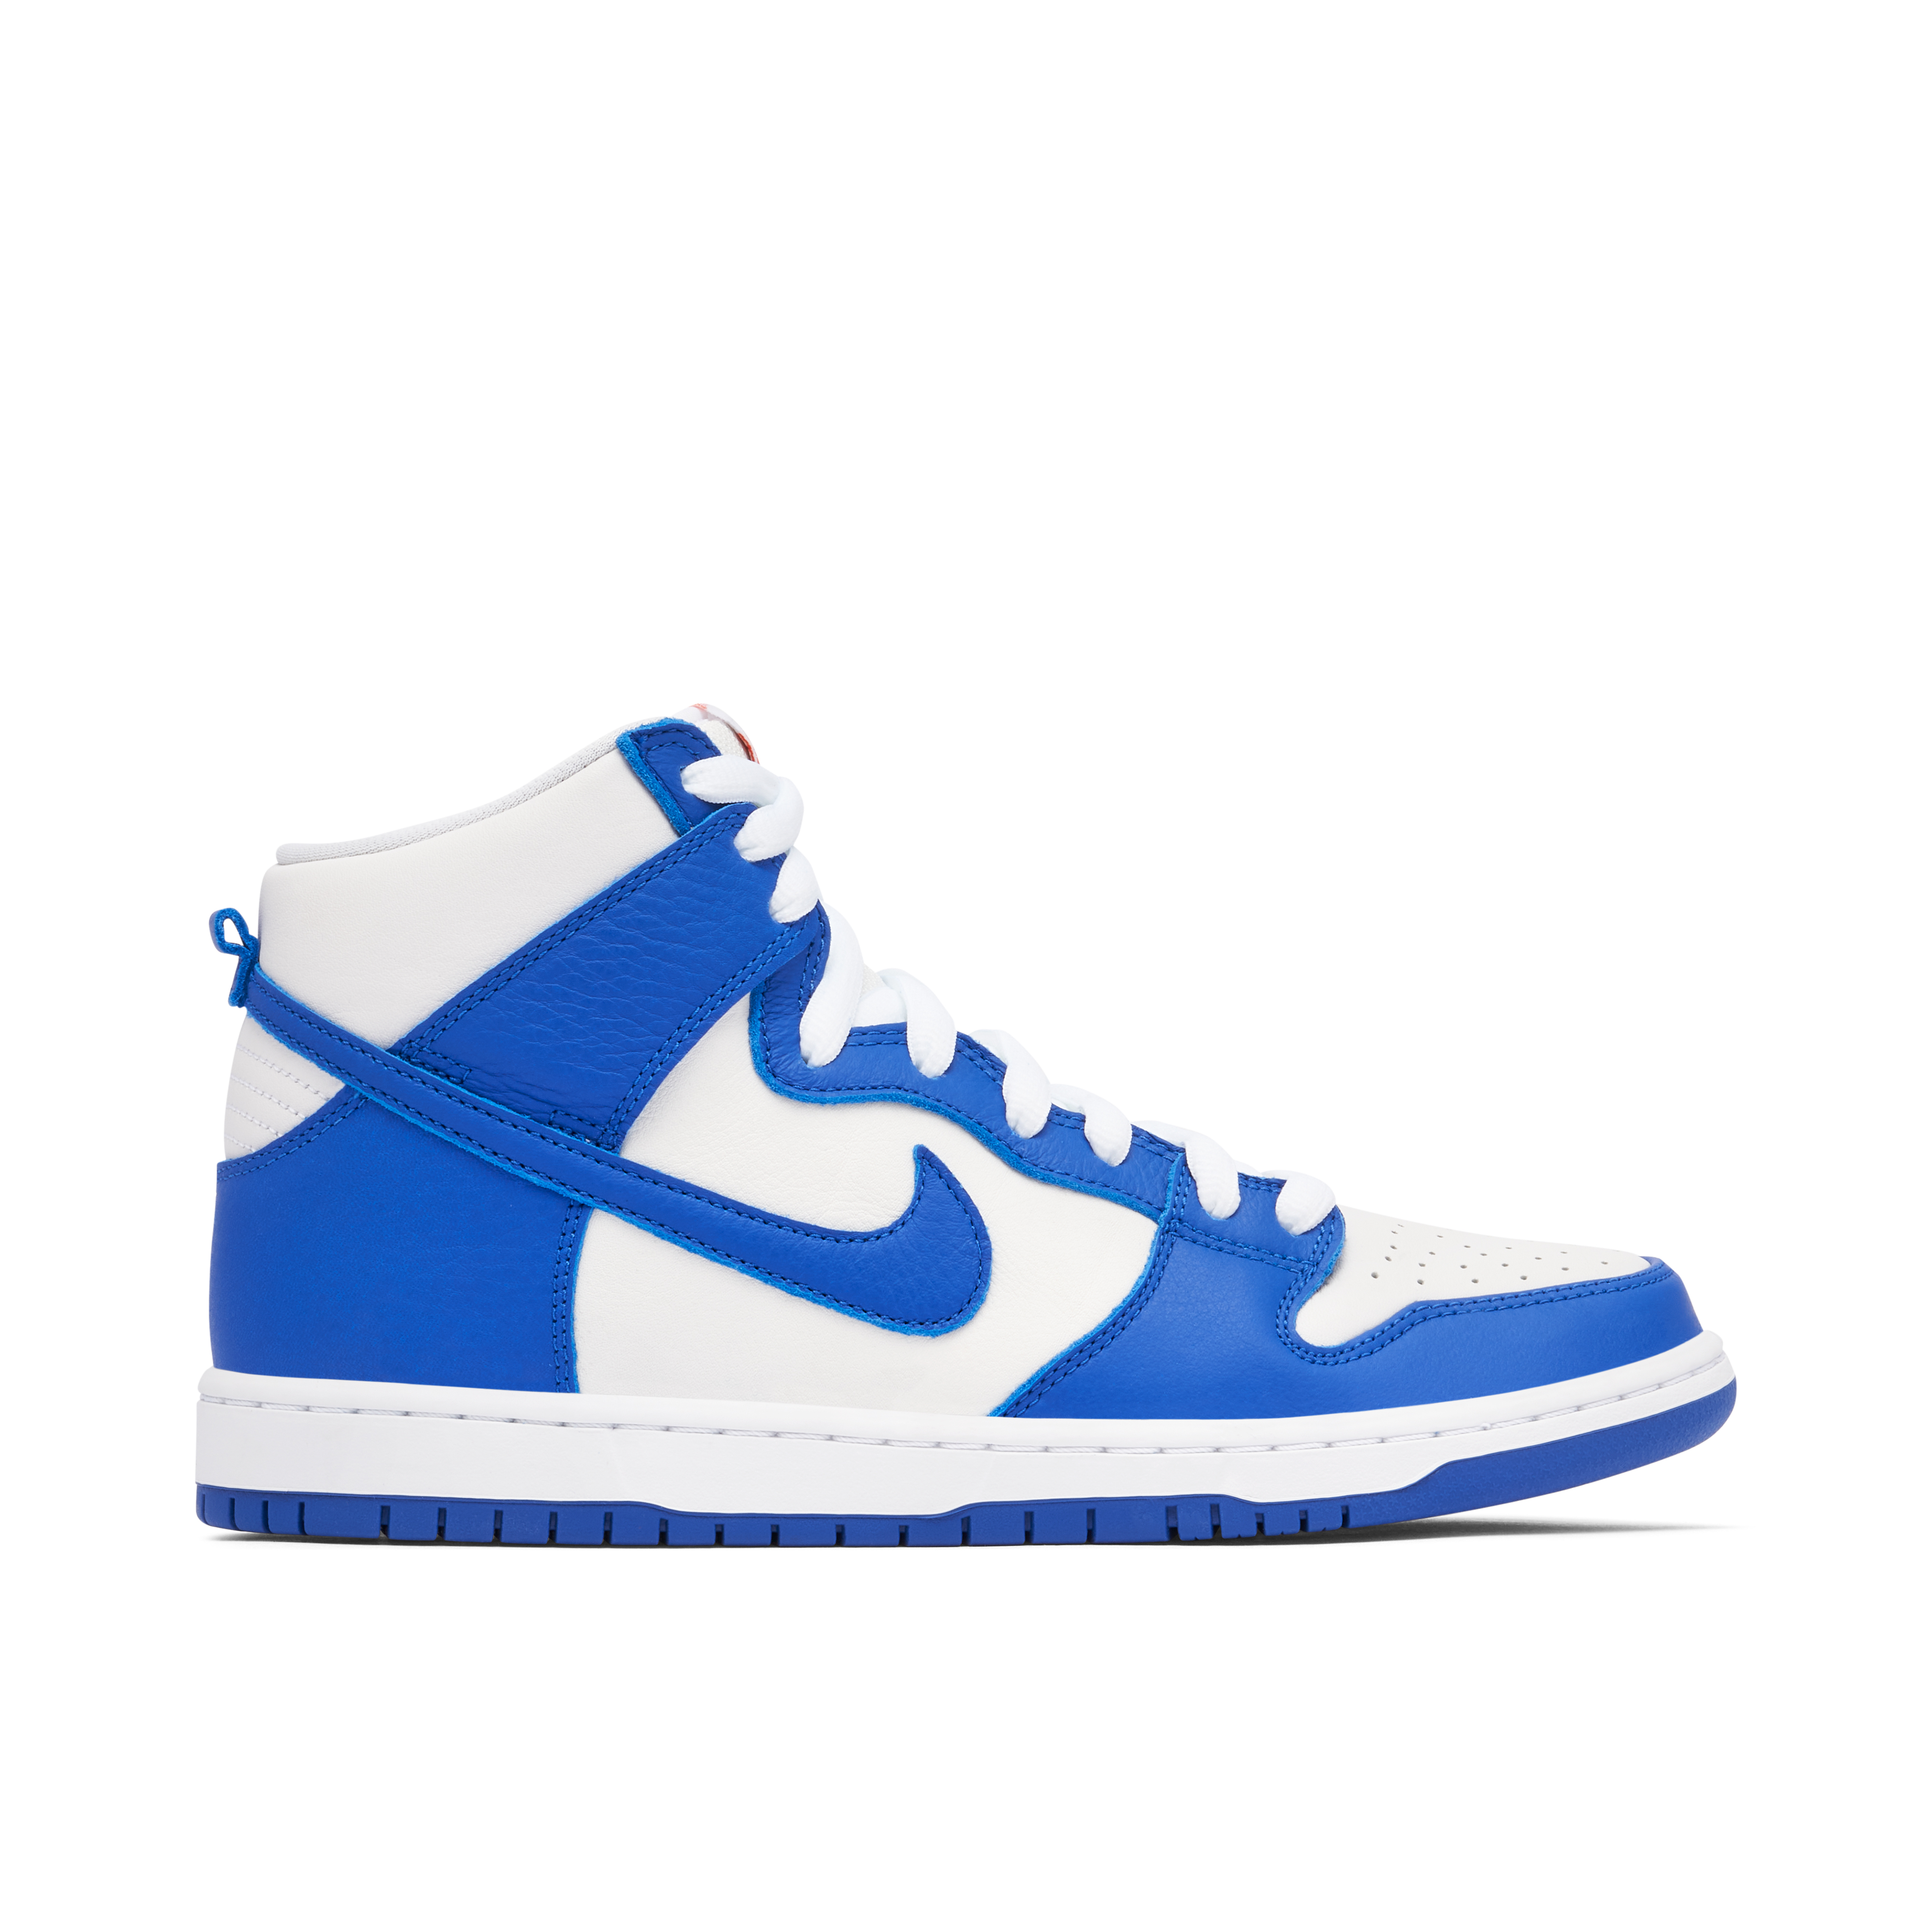 Nike SB Dunk High Pro ISO Kentucky | DH7149-400 | Laced